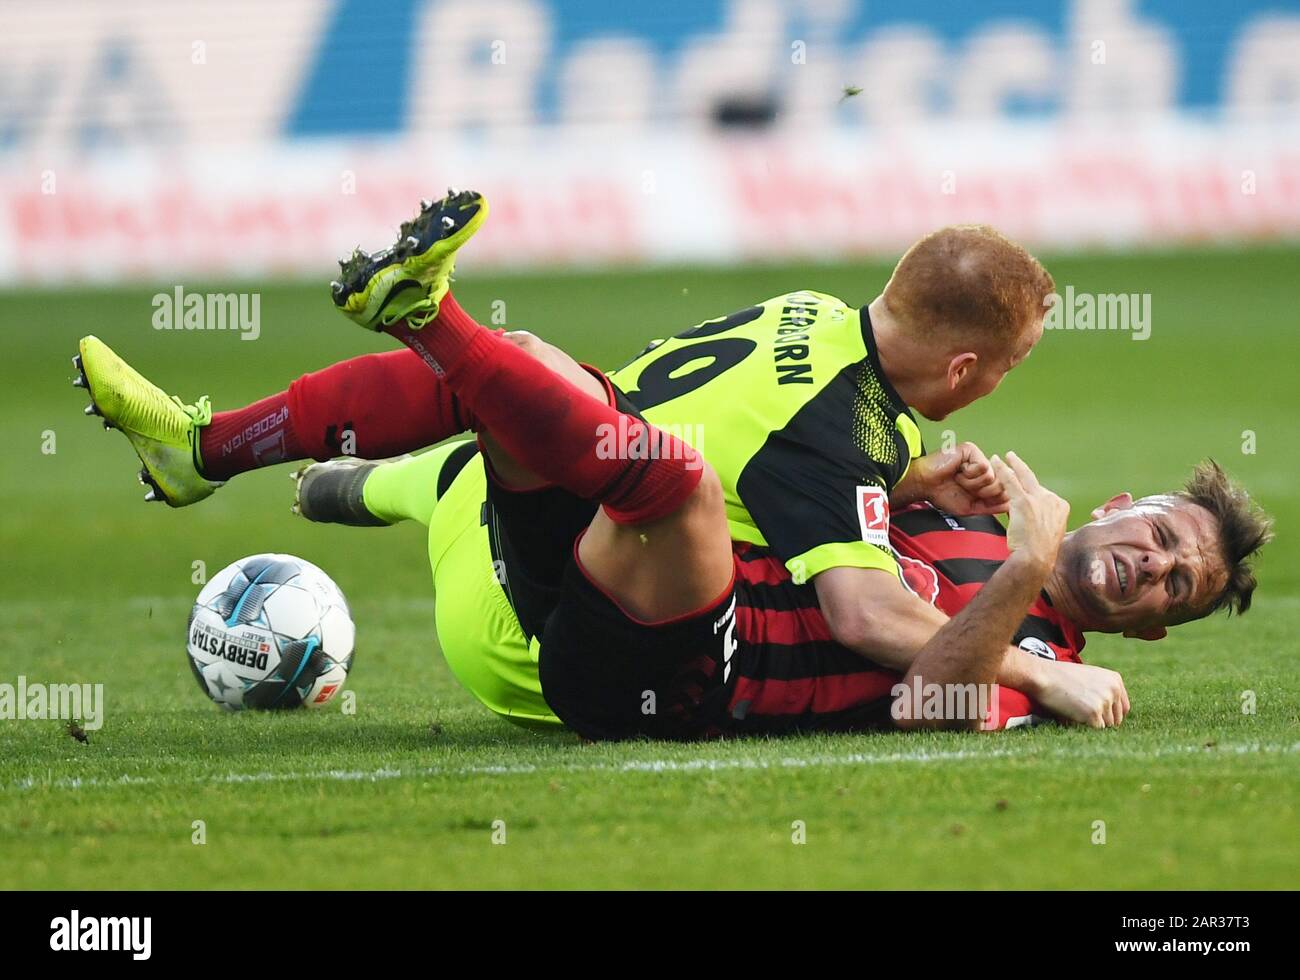 Freiburg, Germany. 25th Jan, 2020. Football: Bundesliga, SC Freiburg - SC Paderborn 07, 19th matchday in the Black Forest Stadium. Sebastian Vasiliadis (l) from Paderborn and Amir Abrashi from Freiburg fight for the ball. Credit: Patrick Seeger/dpa - IMPORTANT NOTE: In accordance with the regulations of the DFL Deutsche Fußball Liga and the DFB Deutscher Fußball-Bund, it is prohibited to exploit or have exploited in the stadium and/or from the game taken photographs in the form of sequence images and/or video-like photo series./dpa/Alamy Live News Stock Photo